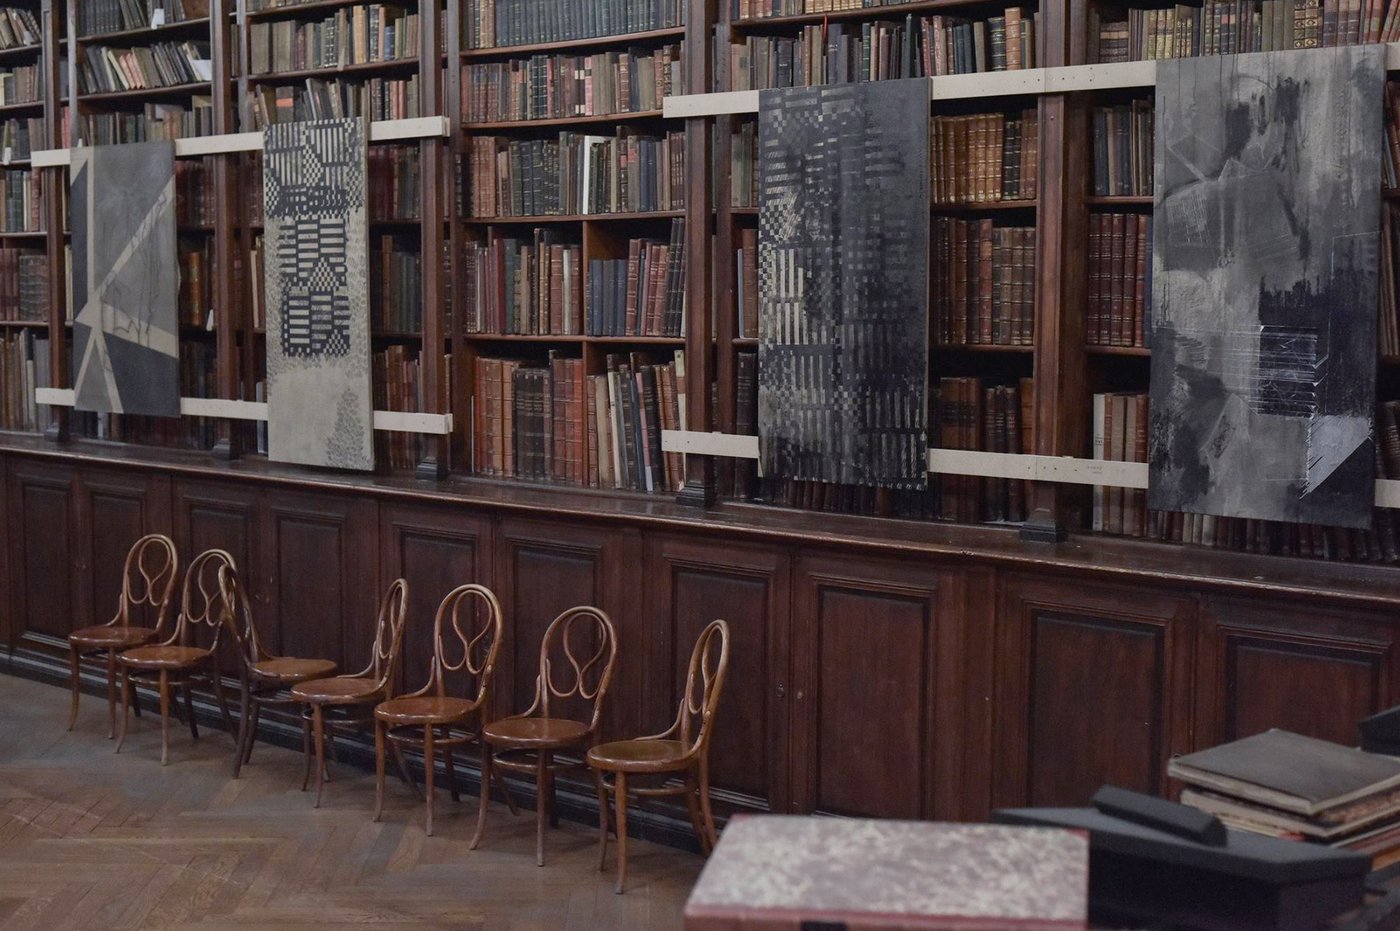 Four paintings by Christian Murzek hung along the library shelves.